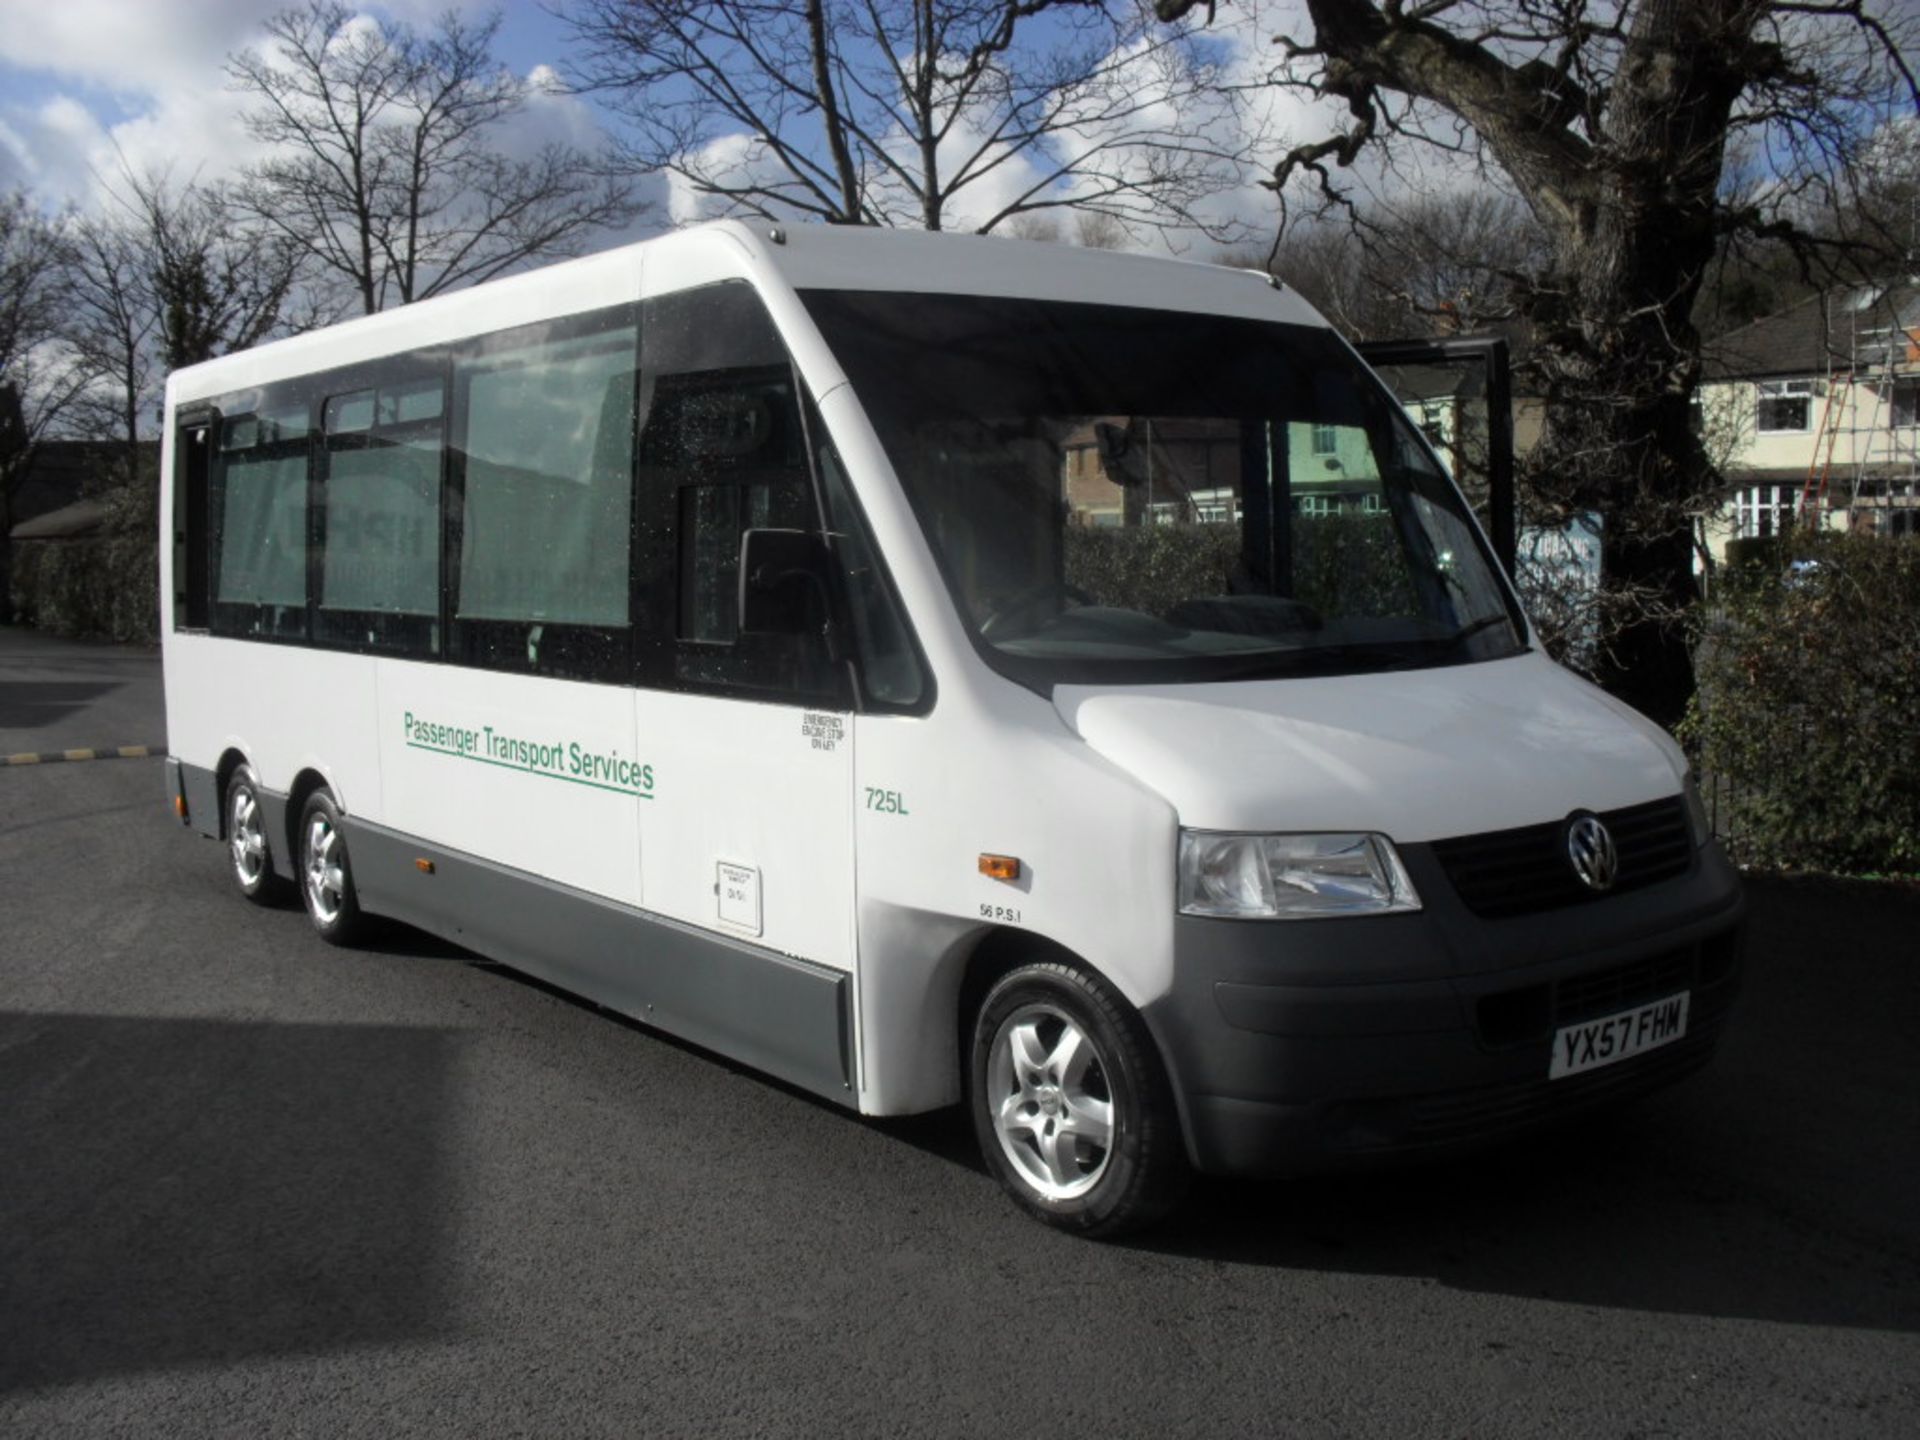 2007 VW Transporter based 12 seater mini bus with disabled access ramp.